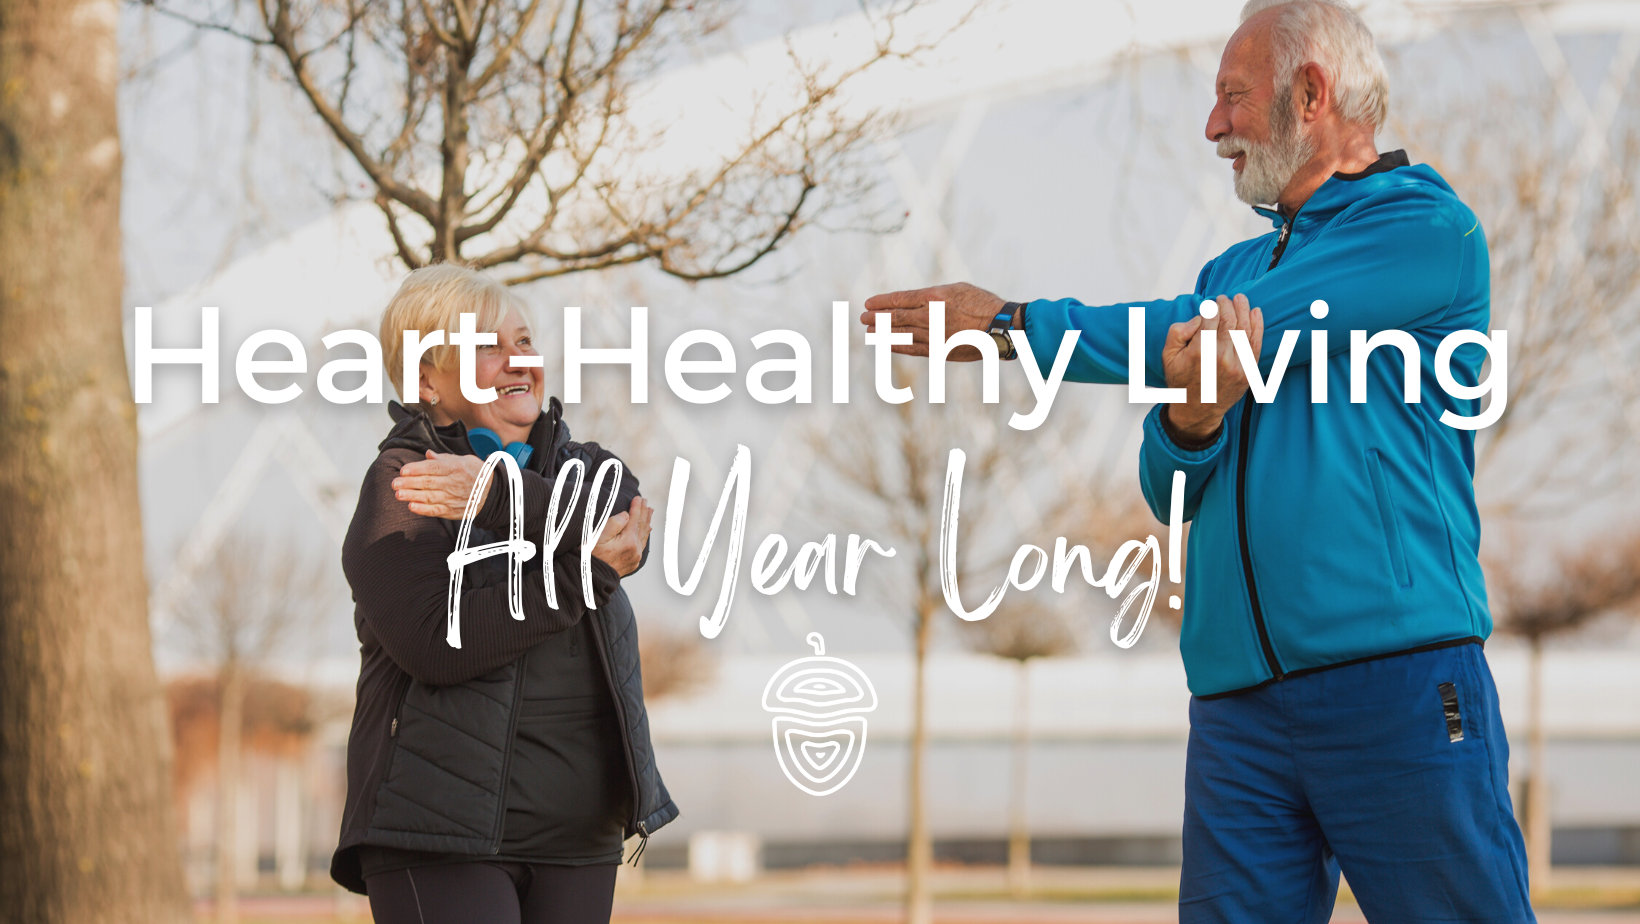 heart-healthy living and exercises for older adults and seniors